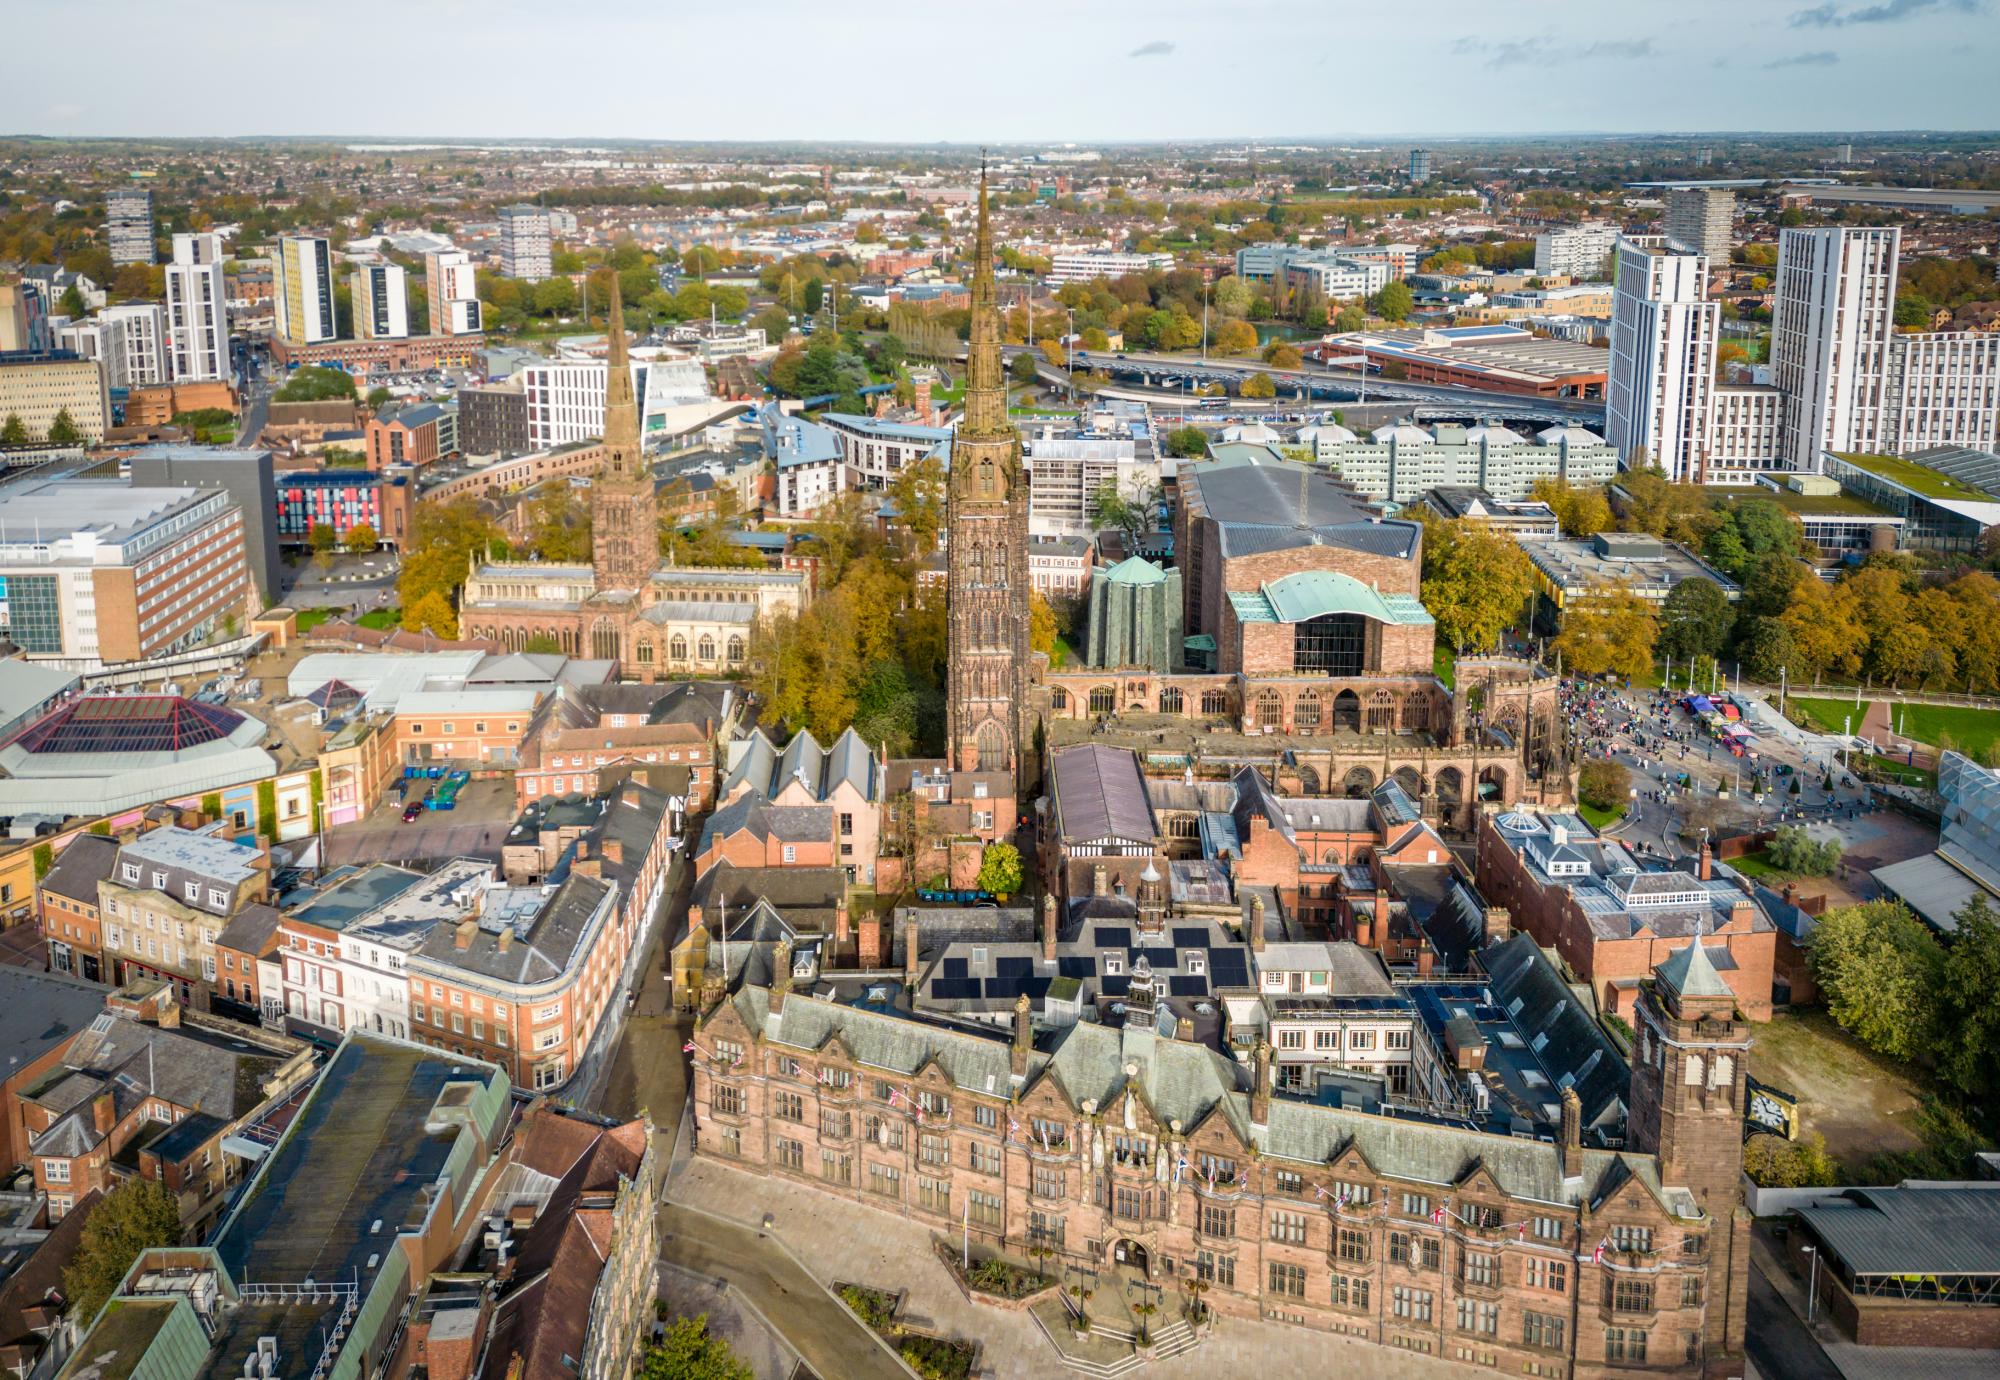 City centre of Coventry